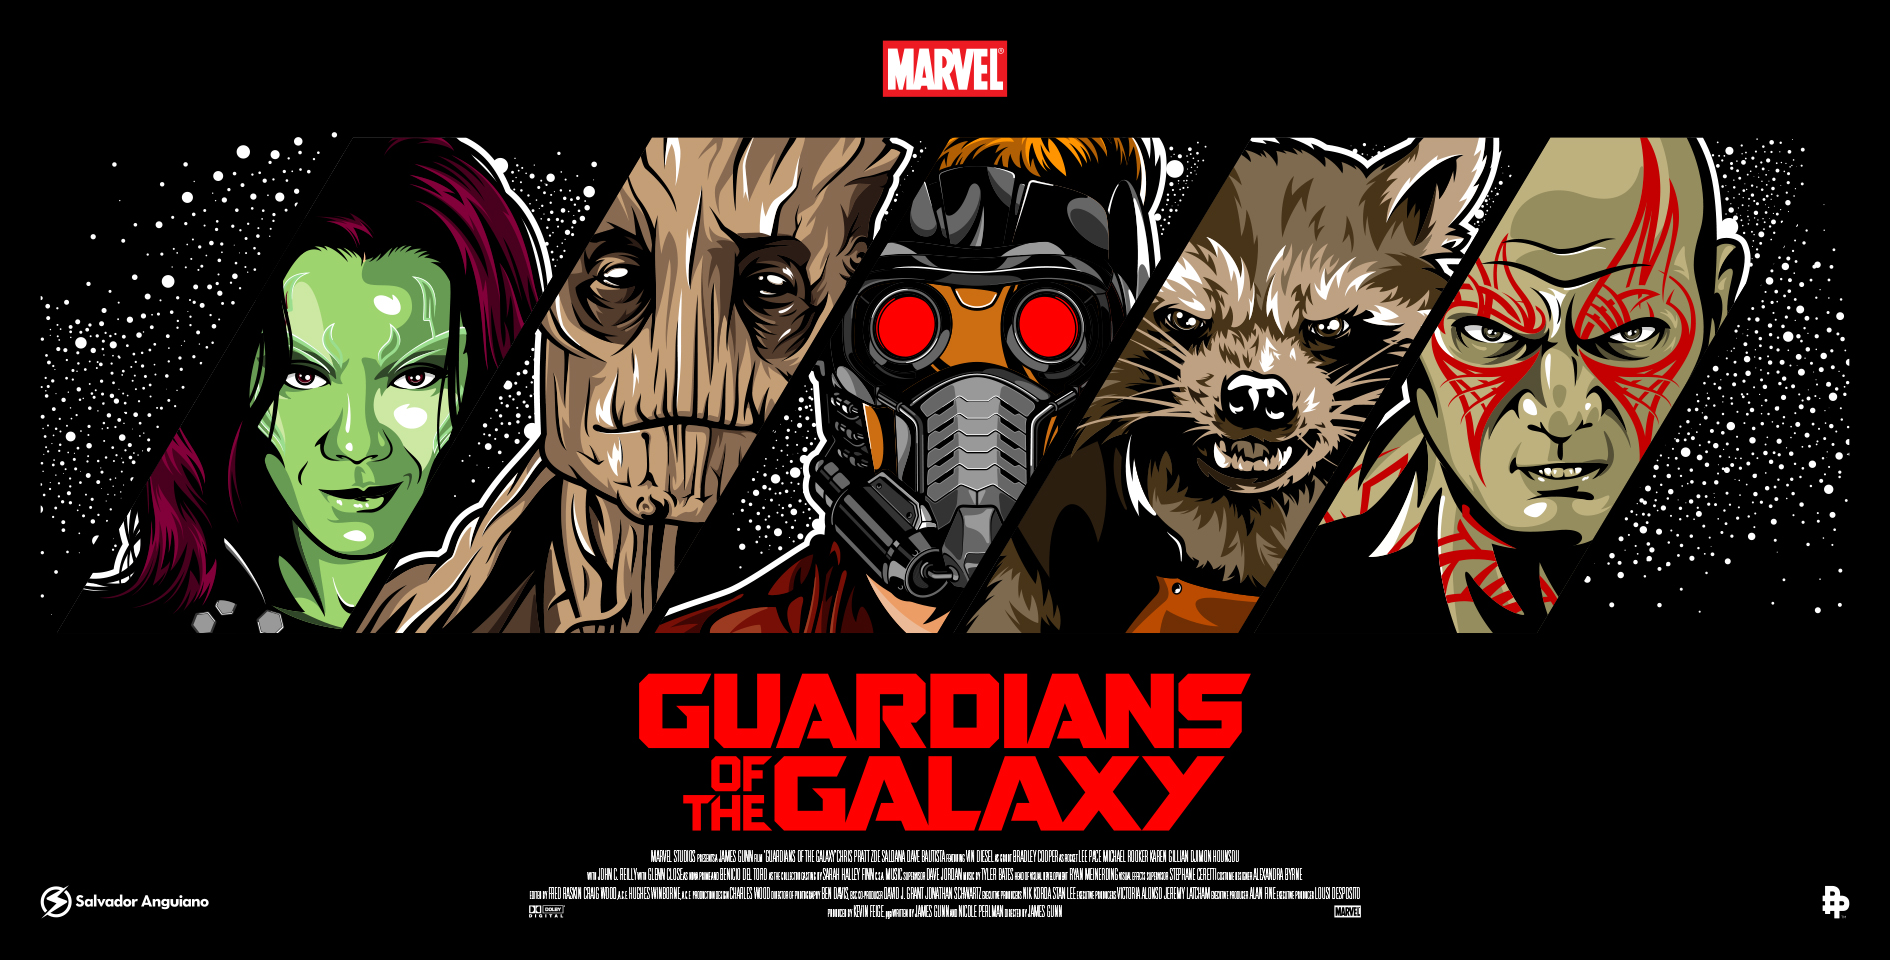 Guardians of the galaxy by Salvador Anguiano